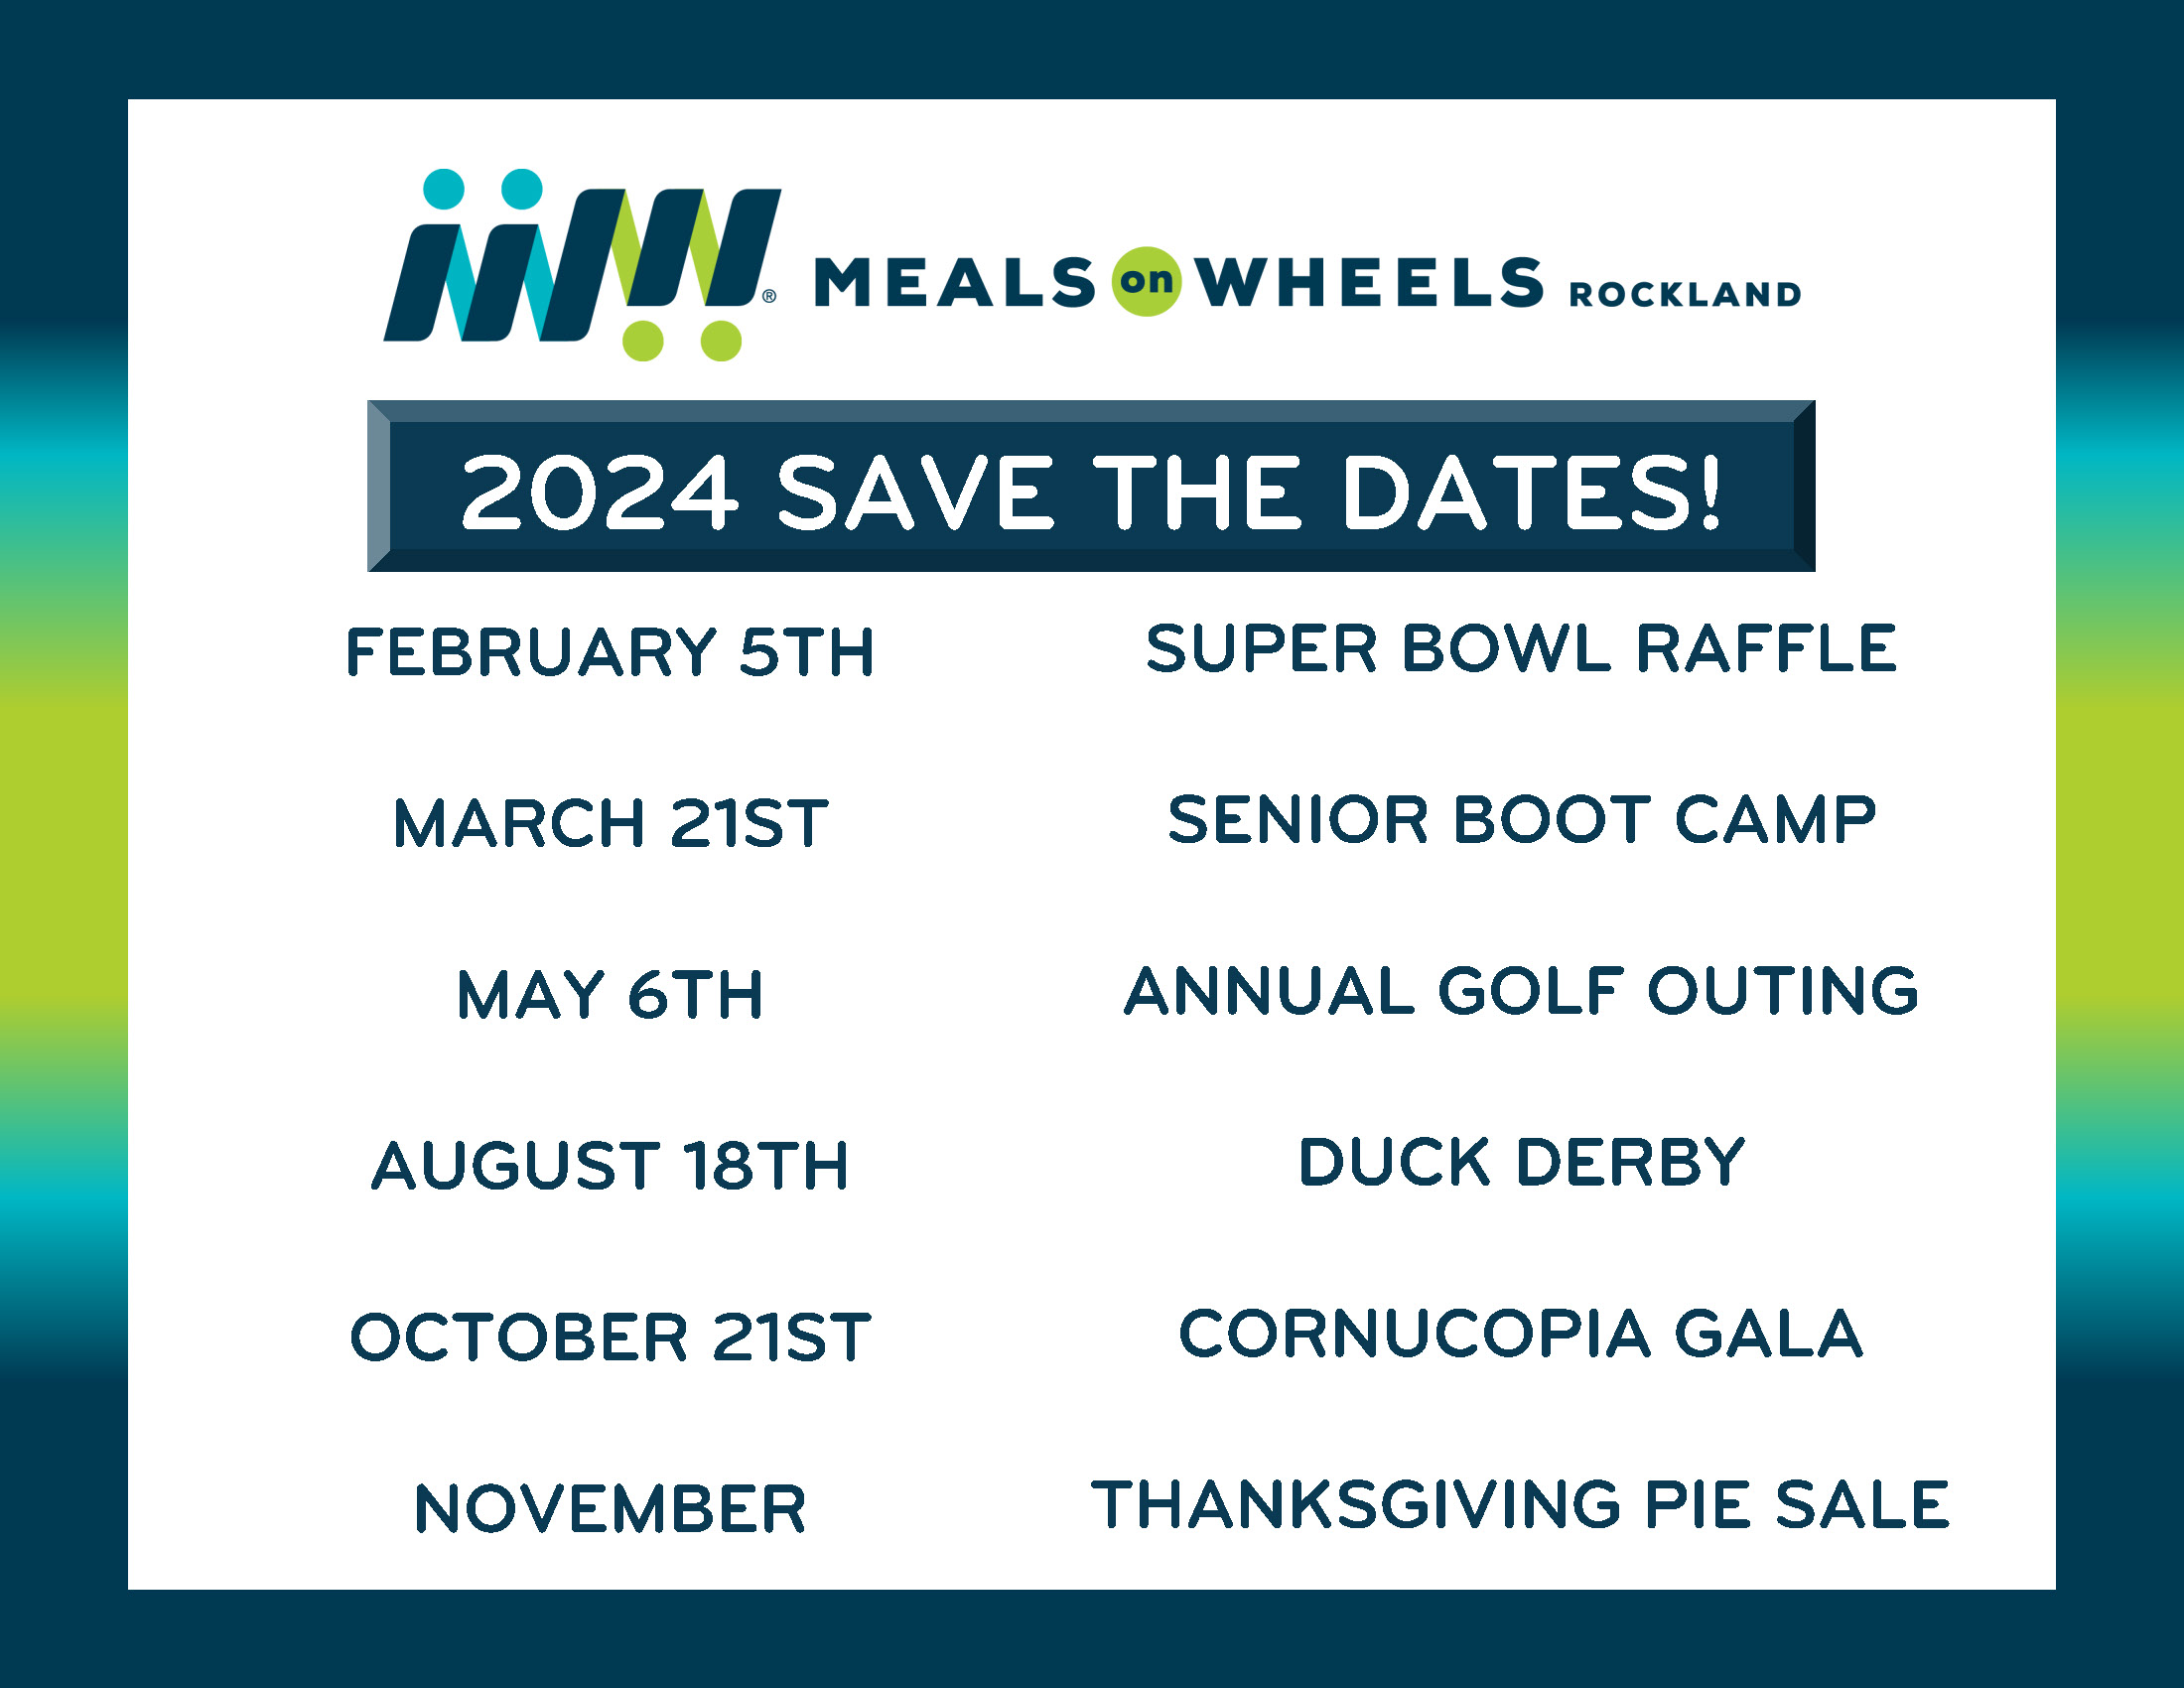 Meals on Wheels Rockland Save the Dates 2024